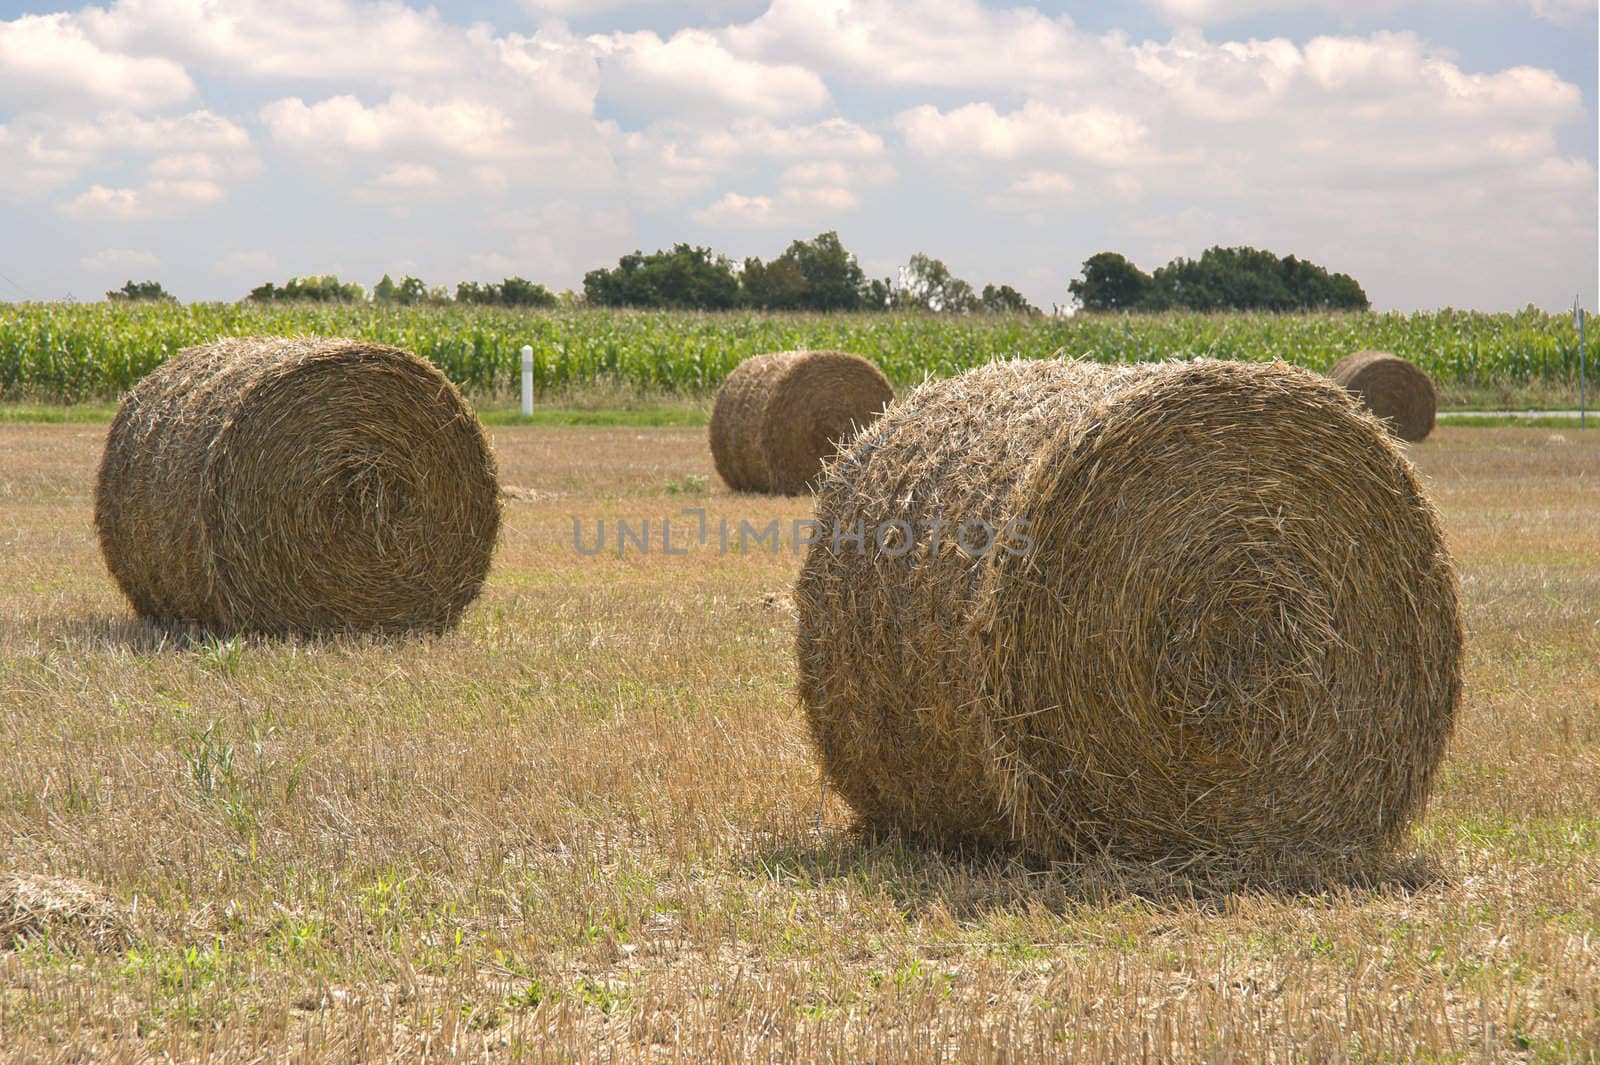 Bales of hay in a French field